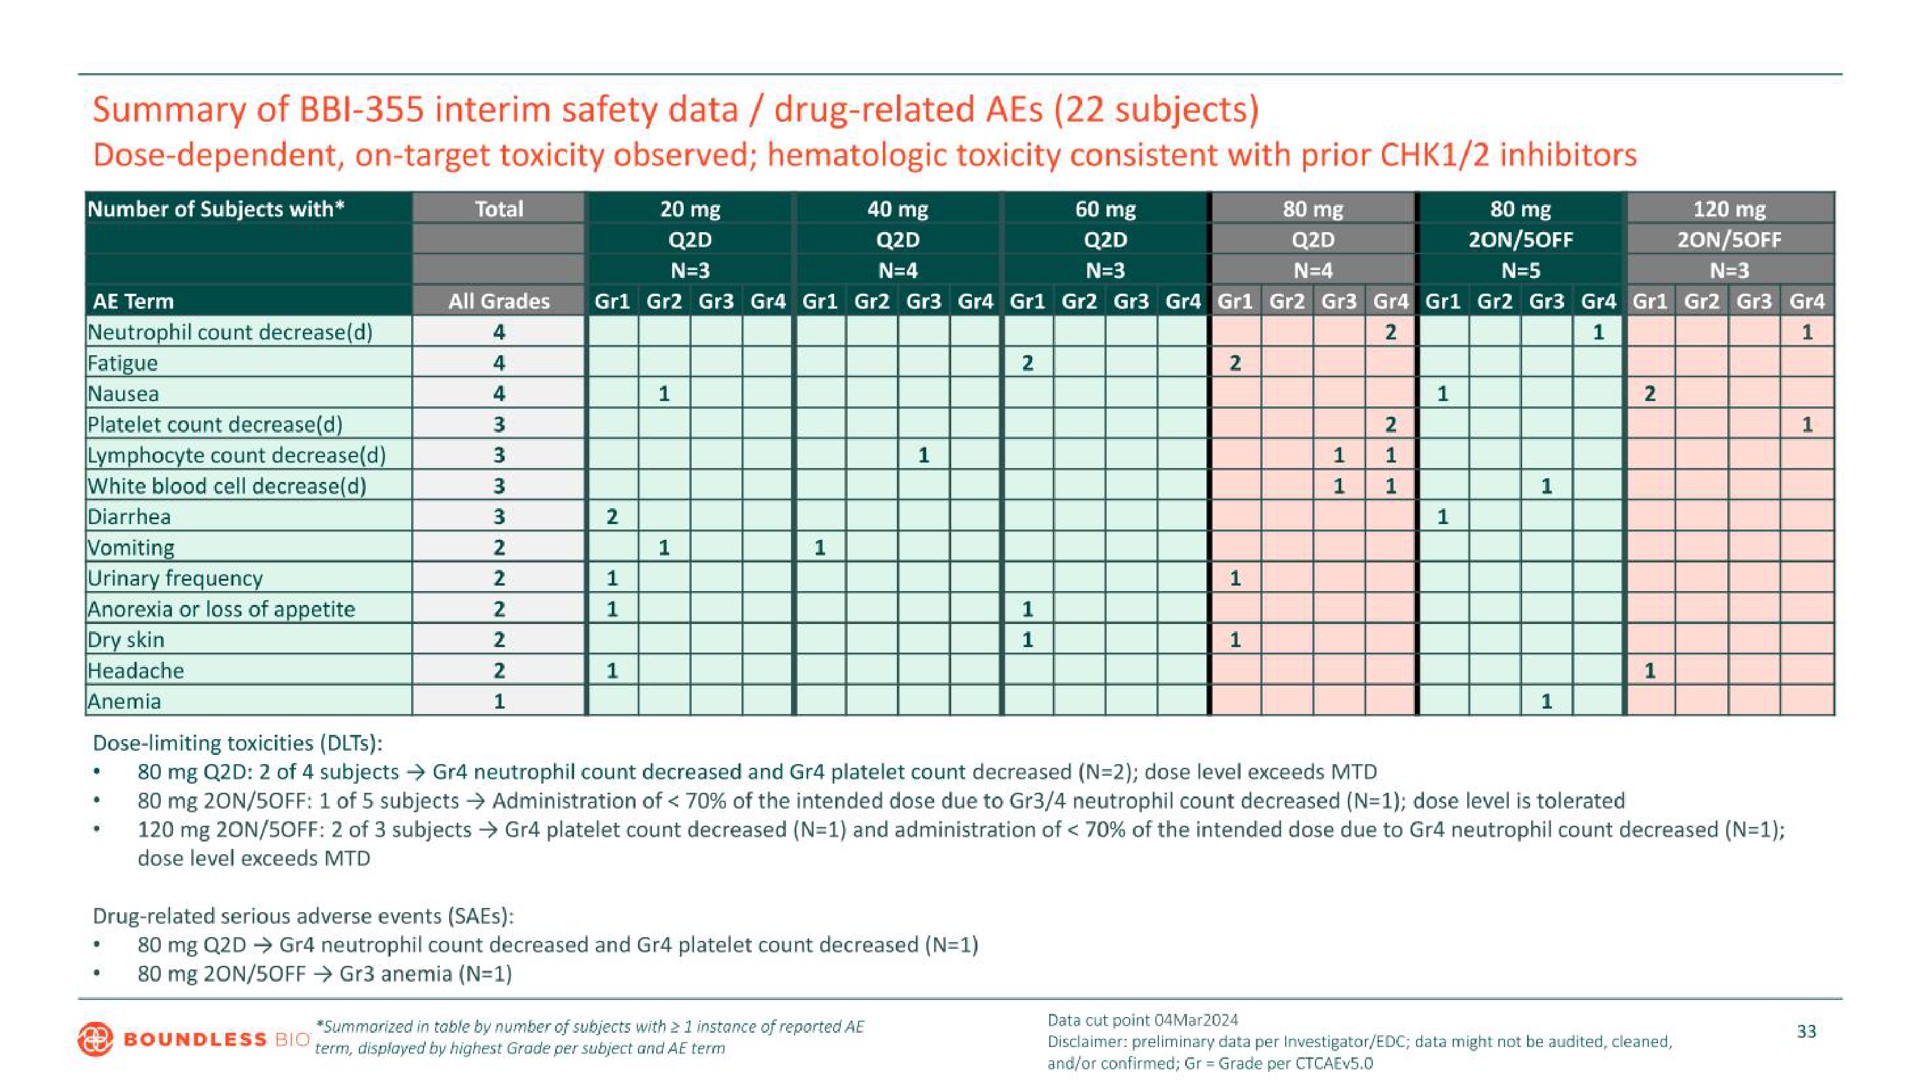 summary of interim safety data drug related aes subjects dose dependent on target toxicity observed toxicity consistent with prior inhibitors i | Boundless Bio